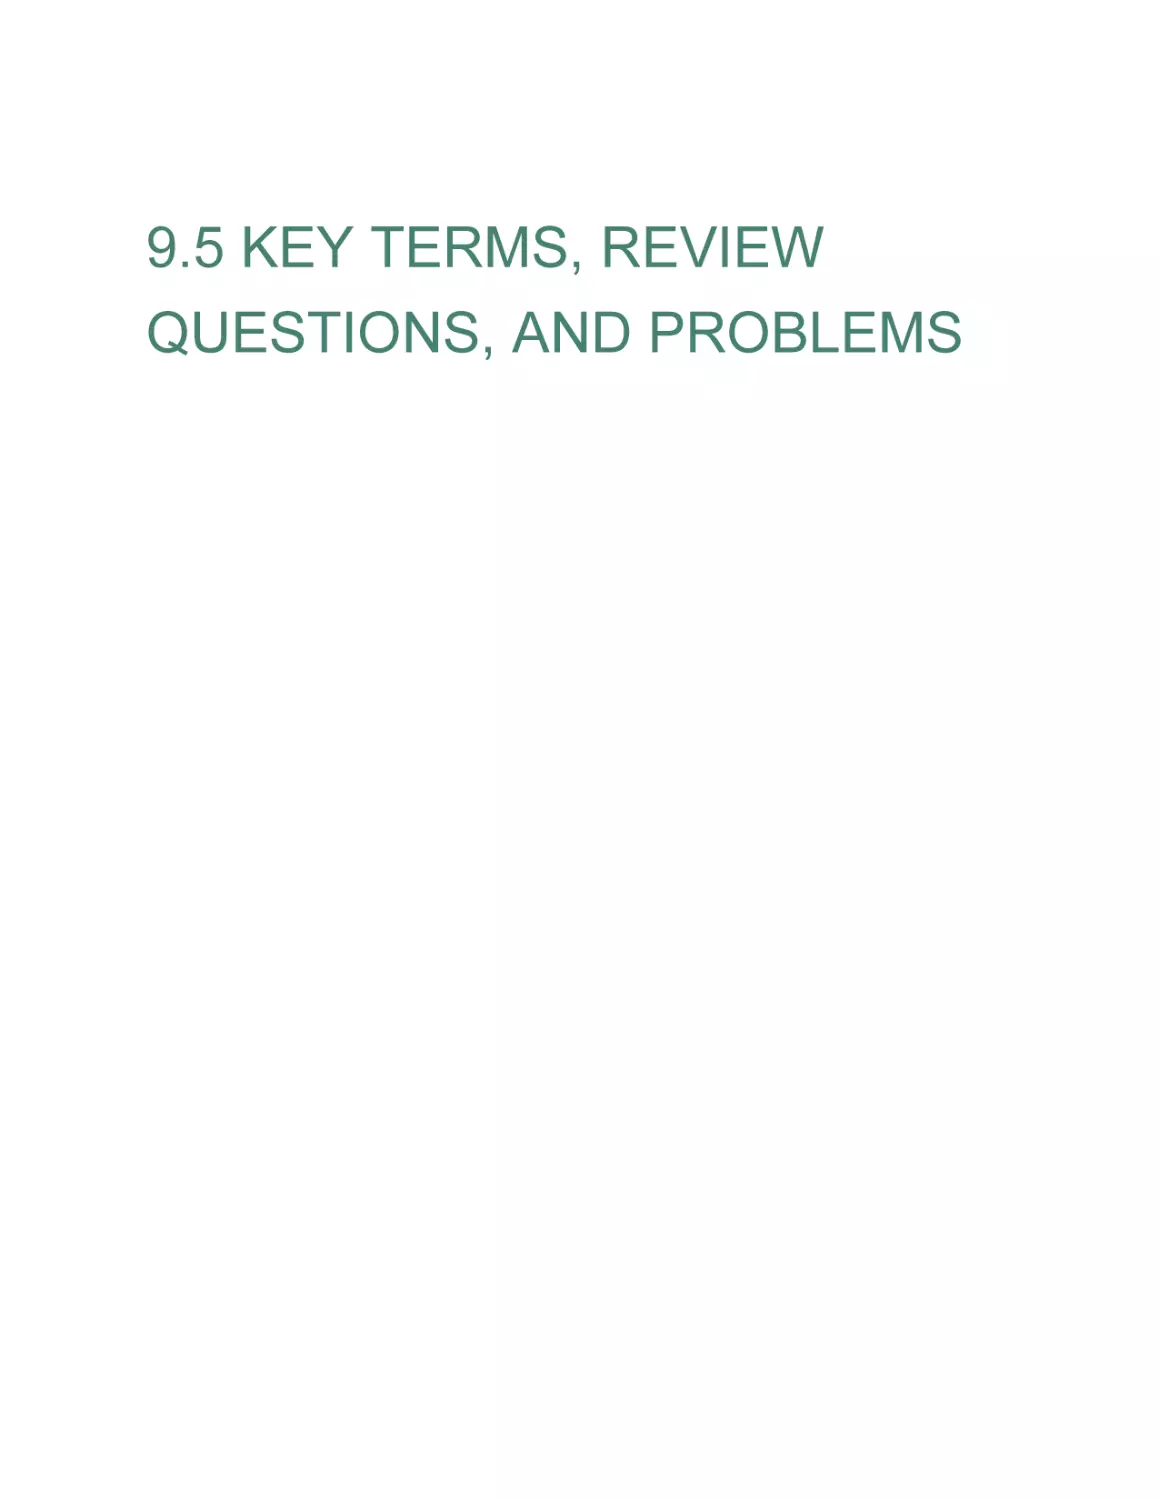 9.5 KEY TERMS, REVIEW QUESTIONS, AND PROBLEMS